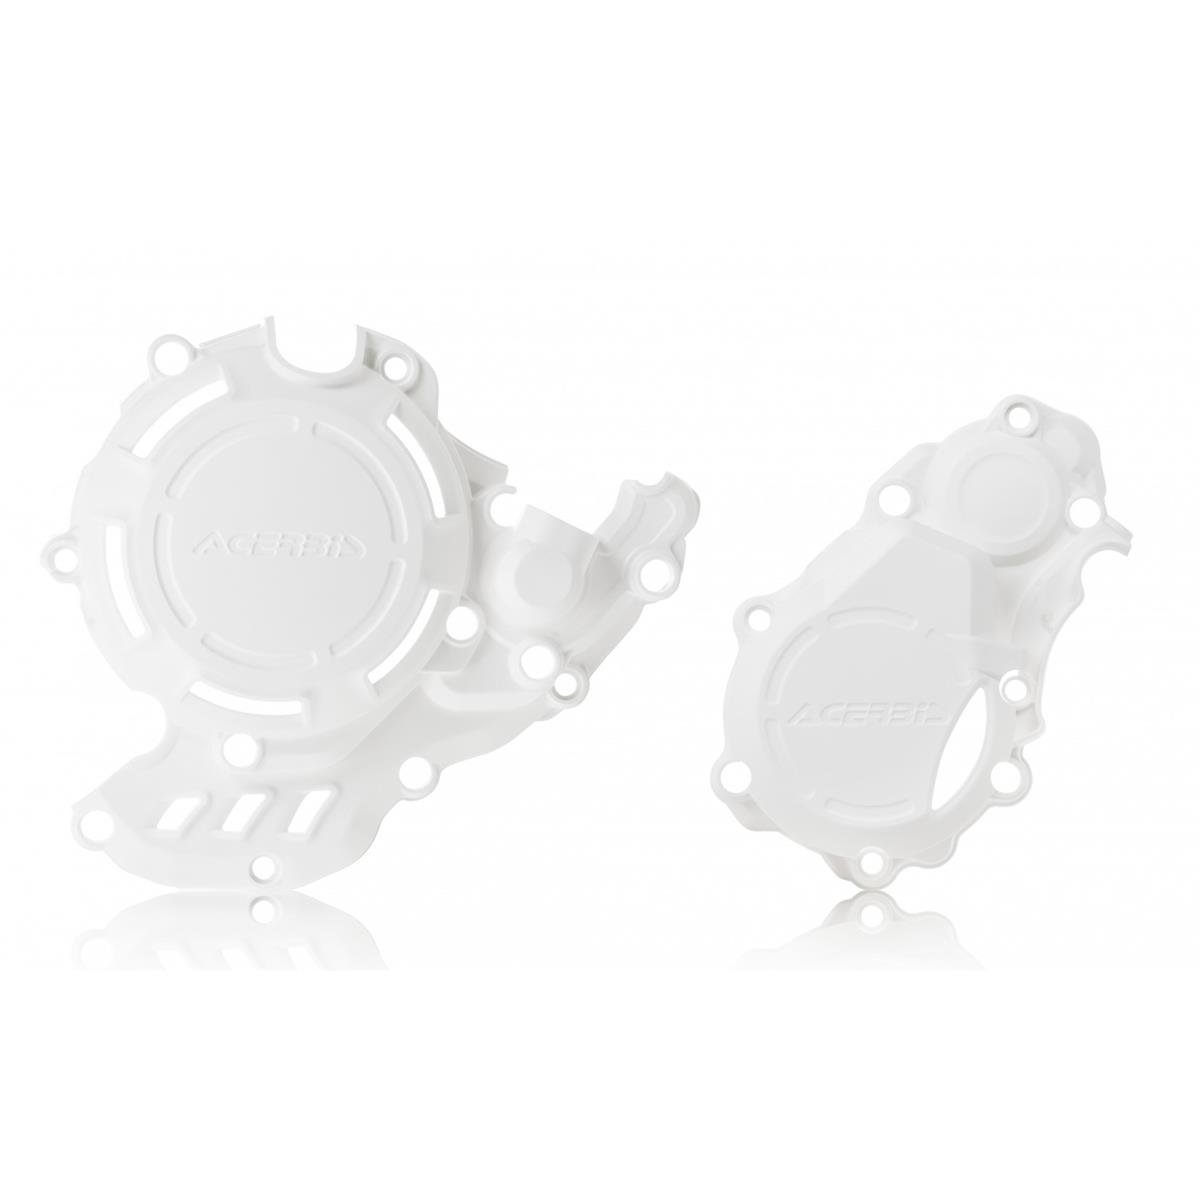 Acerbis Clutch/Ignition Cover Protection X-Power KTM SX-F 250/350 16-, Husqvarna FC 250/350 16-, Gas Gas MC 250/350 F, White